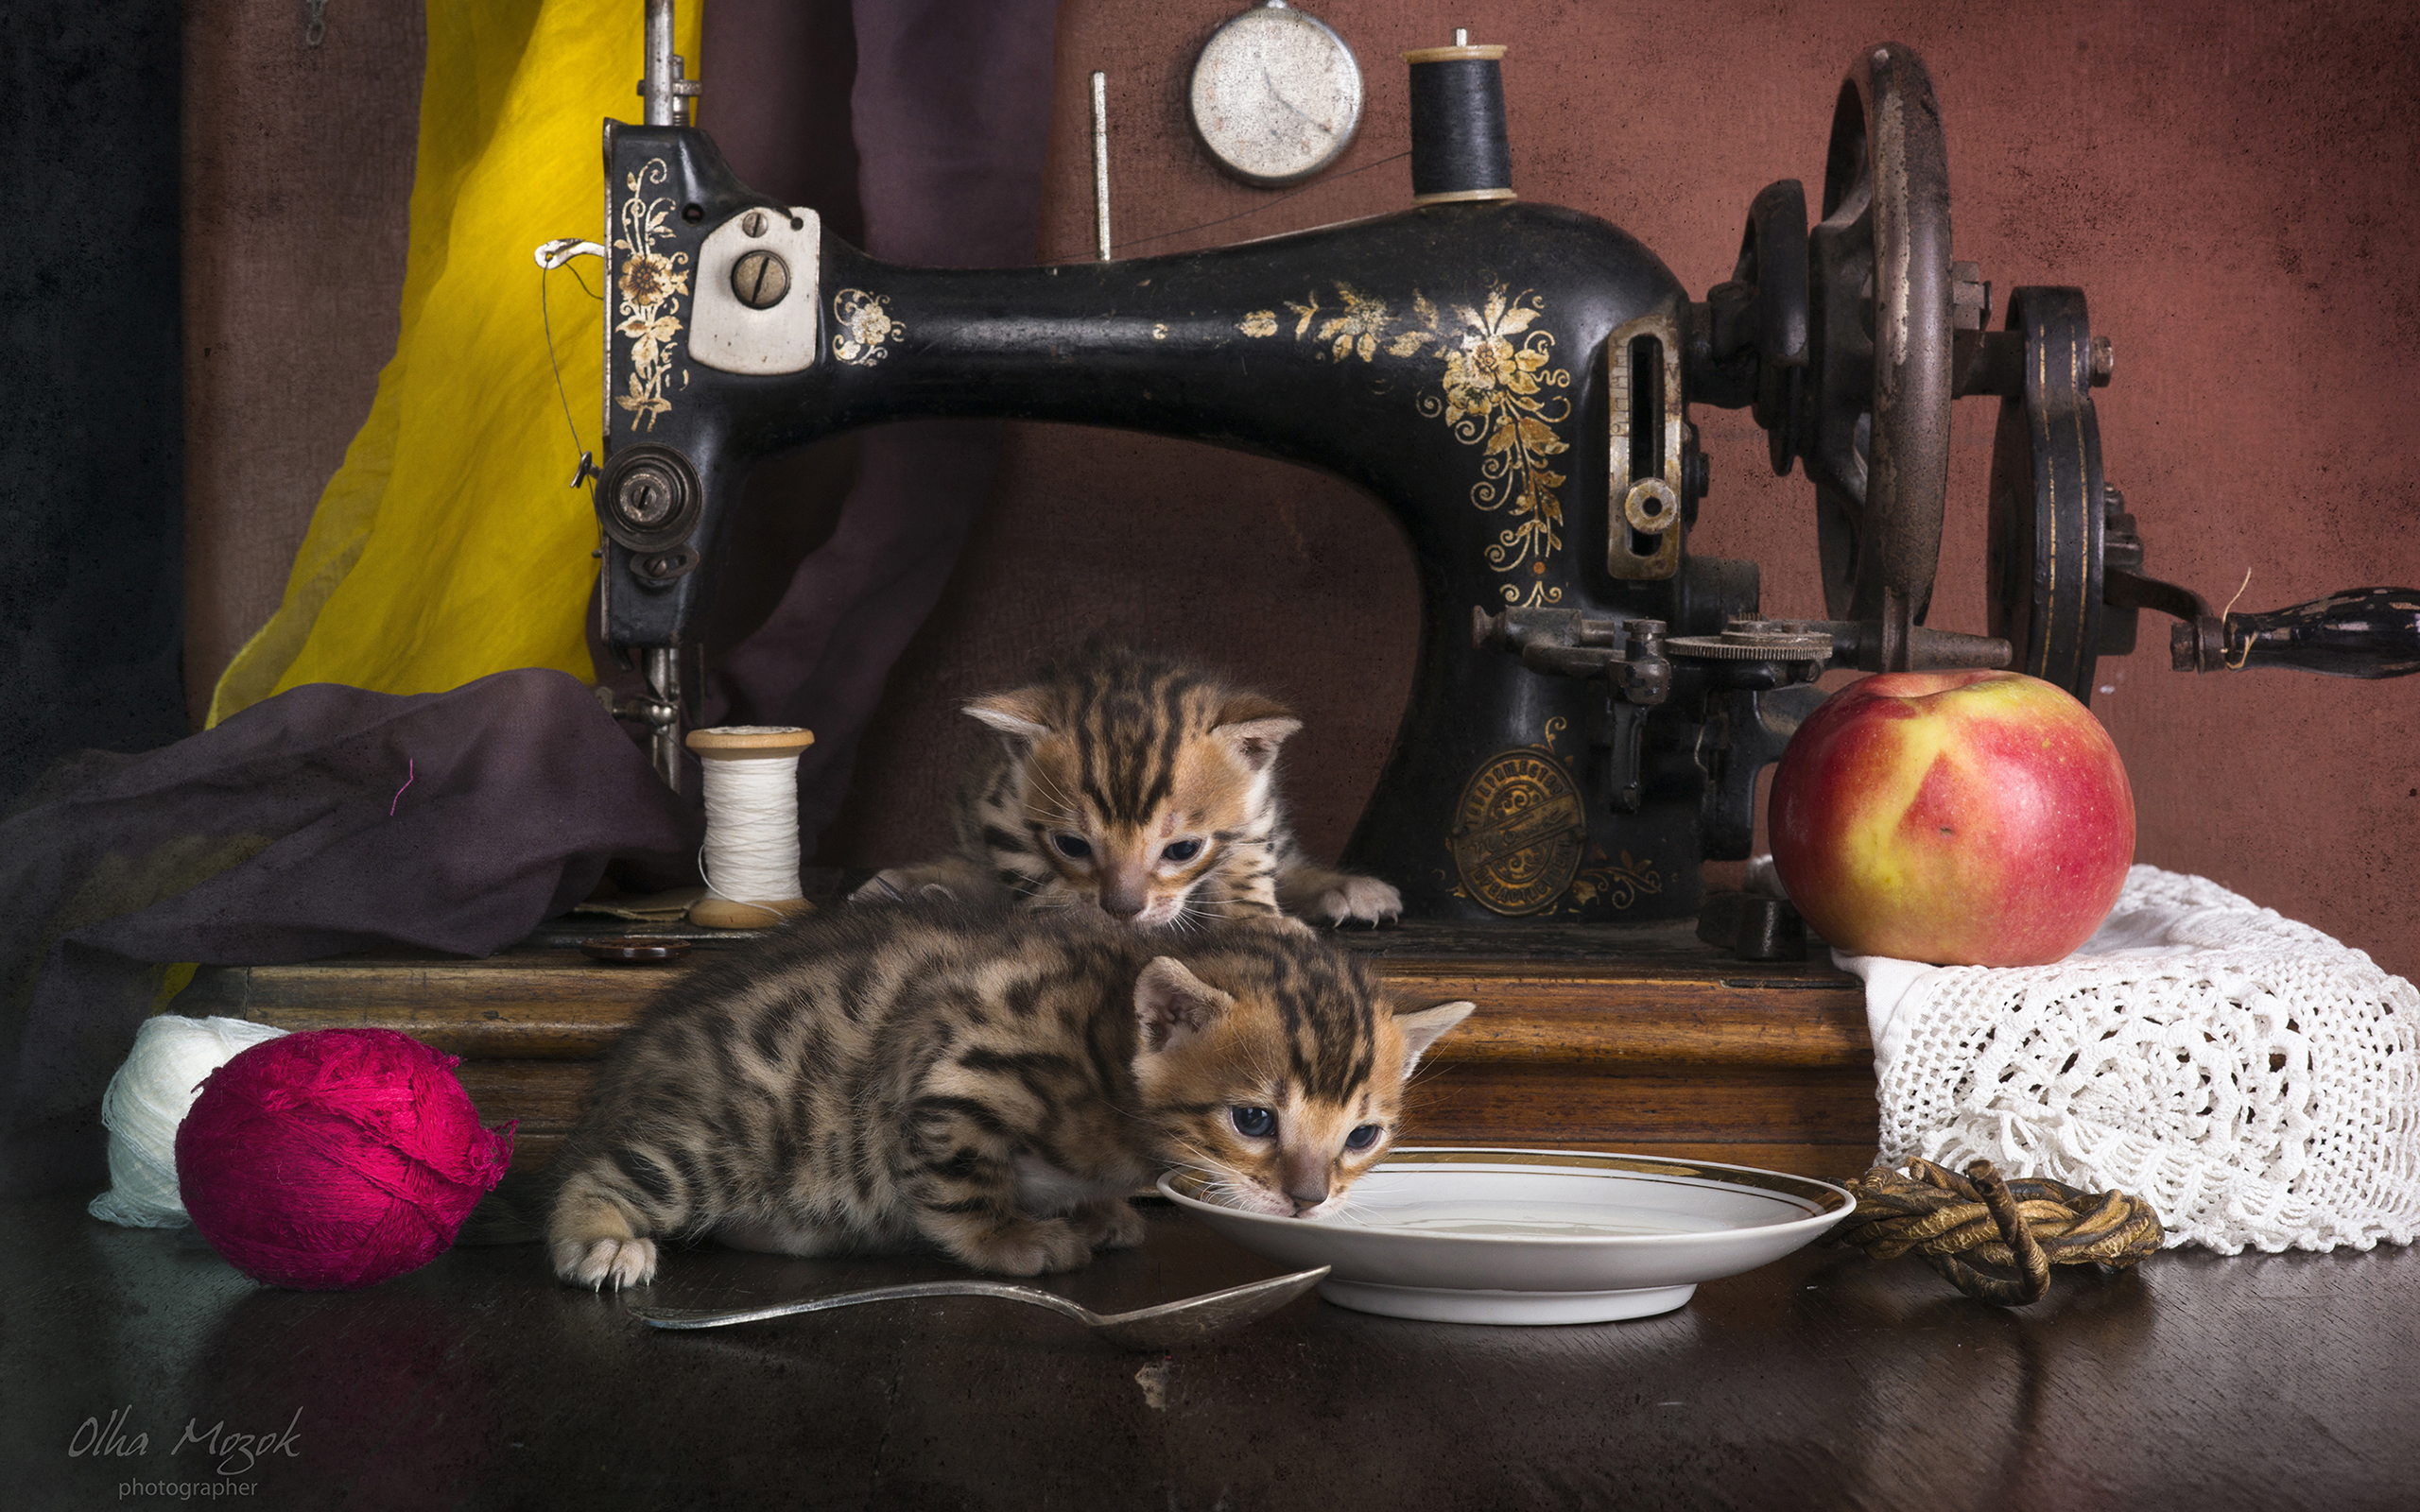 Kittens Next To Vintage Sewing Machine HD Wallpaper Background